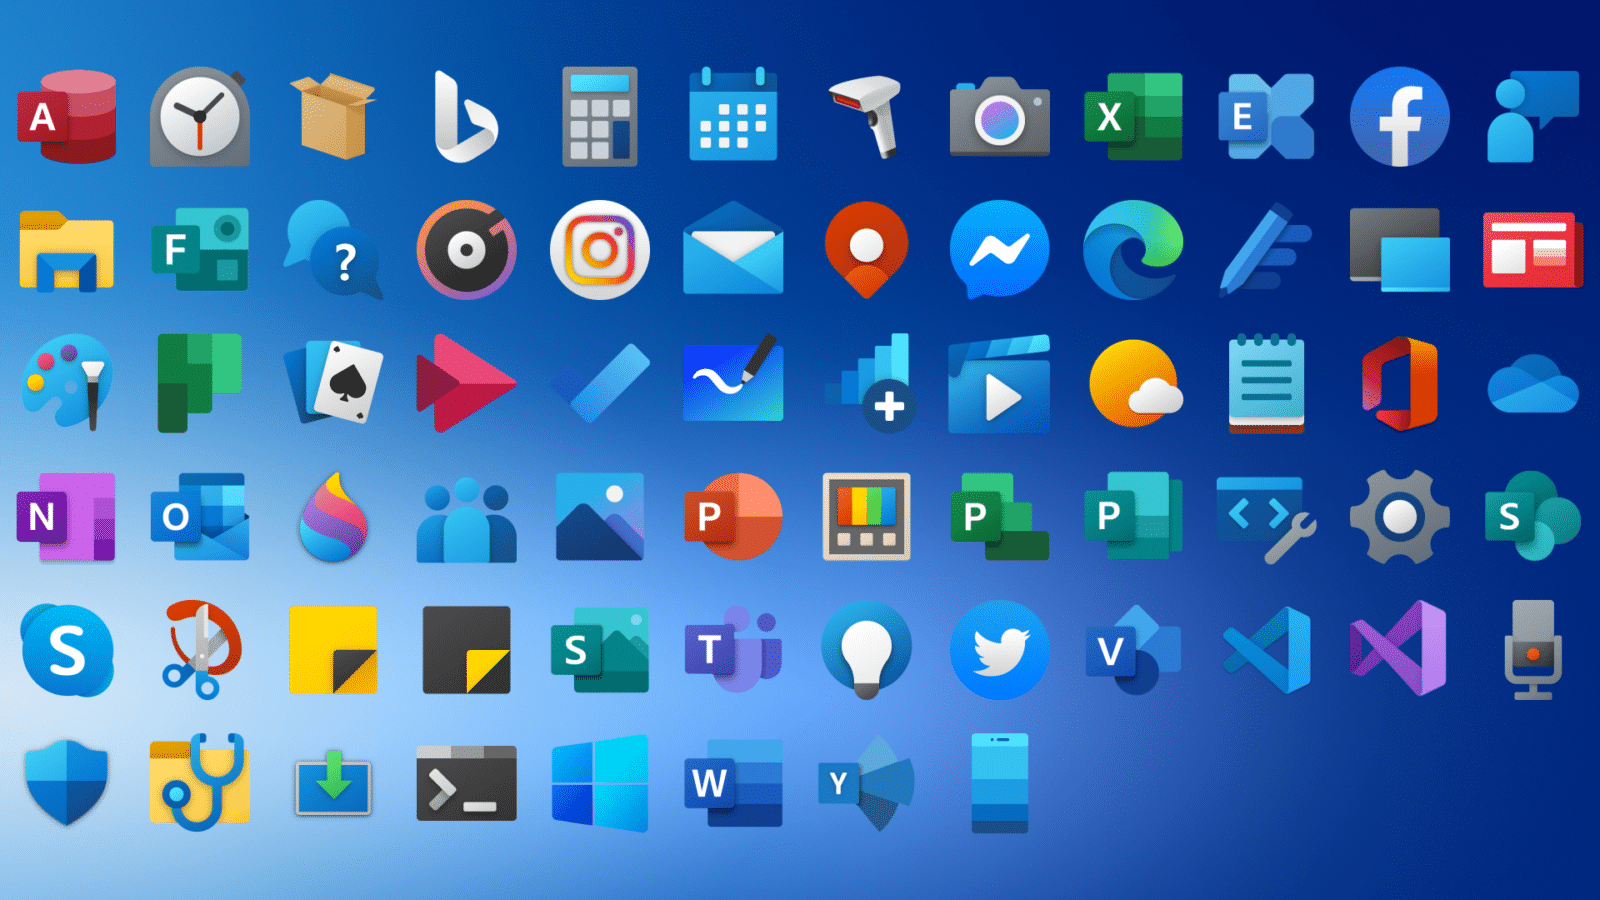 cool icon packs for windows 8